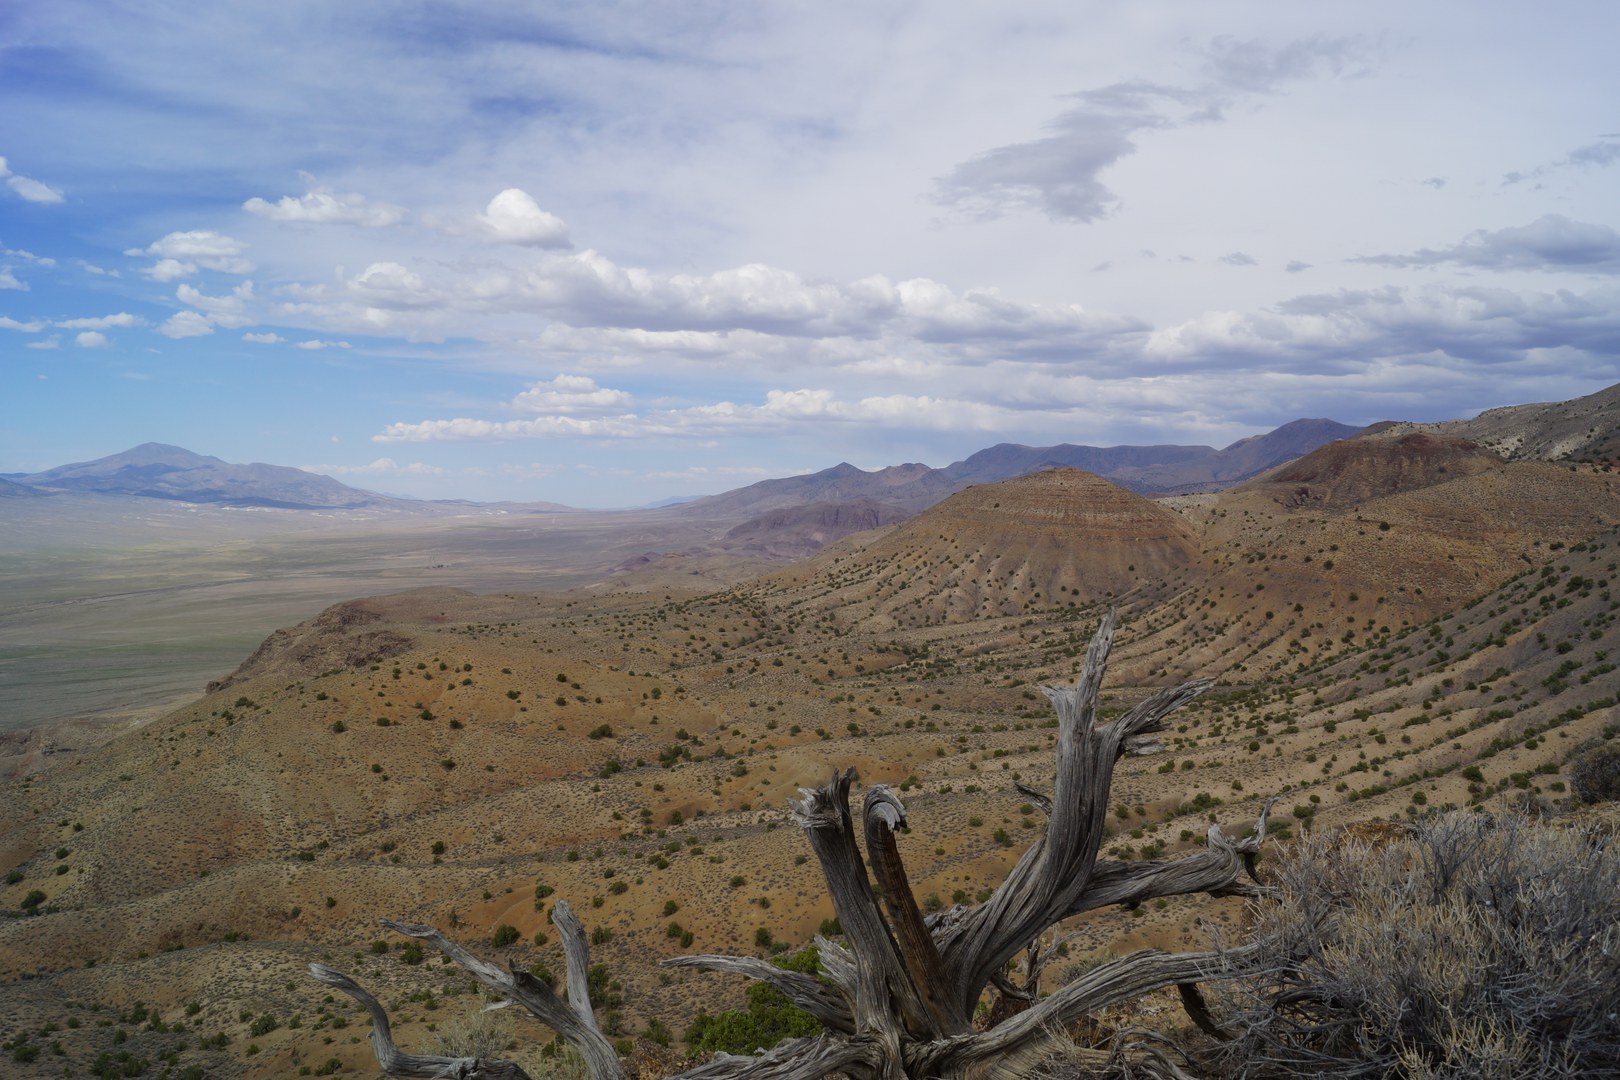 Owing to their remote location, fossils have only recently been discovered in the Augusta Mountains. An international team of scientists led by Dr. Sander began collecting on public lands there 30 years ago, with fossil finds being accessioned to the Natural History Museum of Los Angeles County, since 2008.